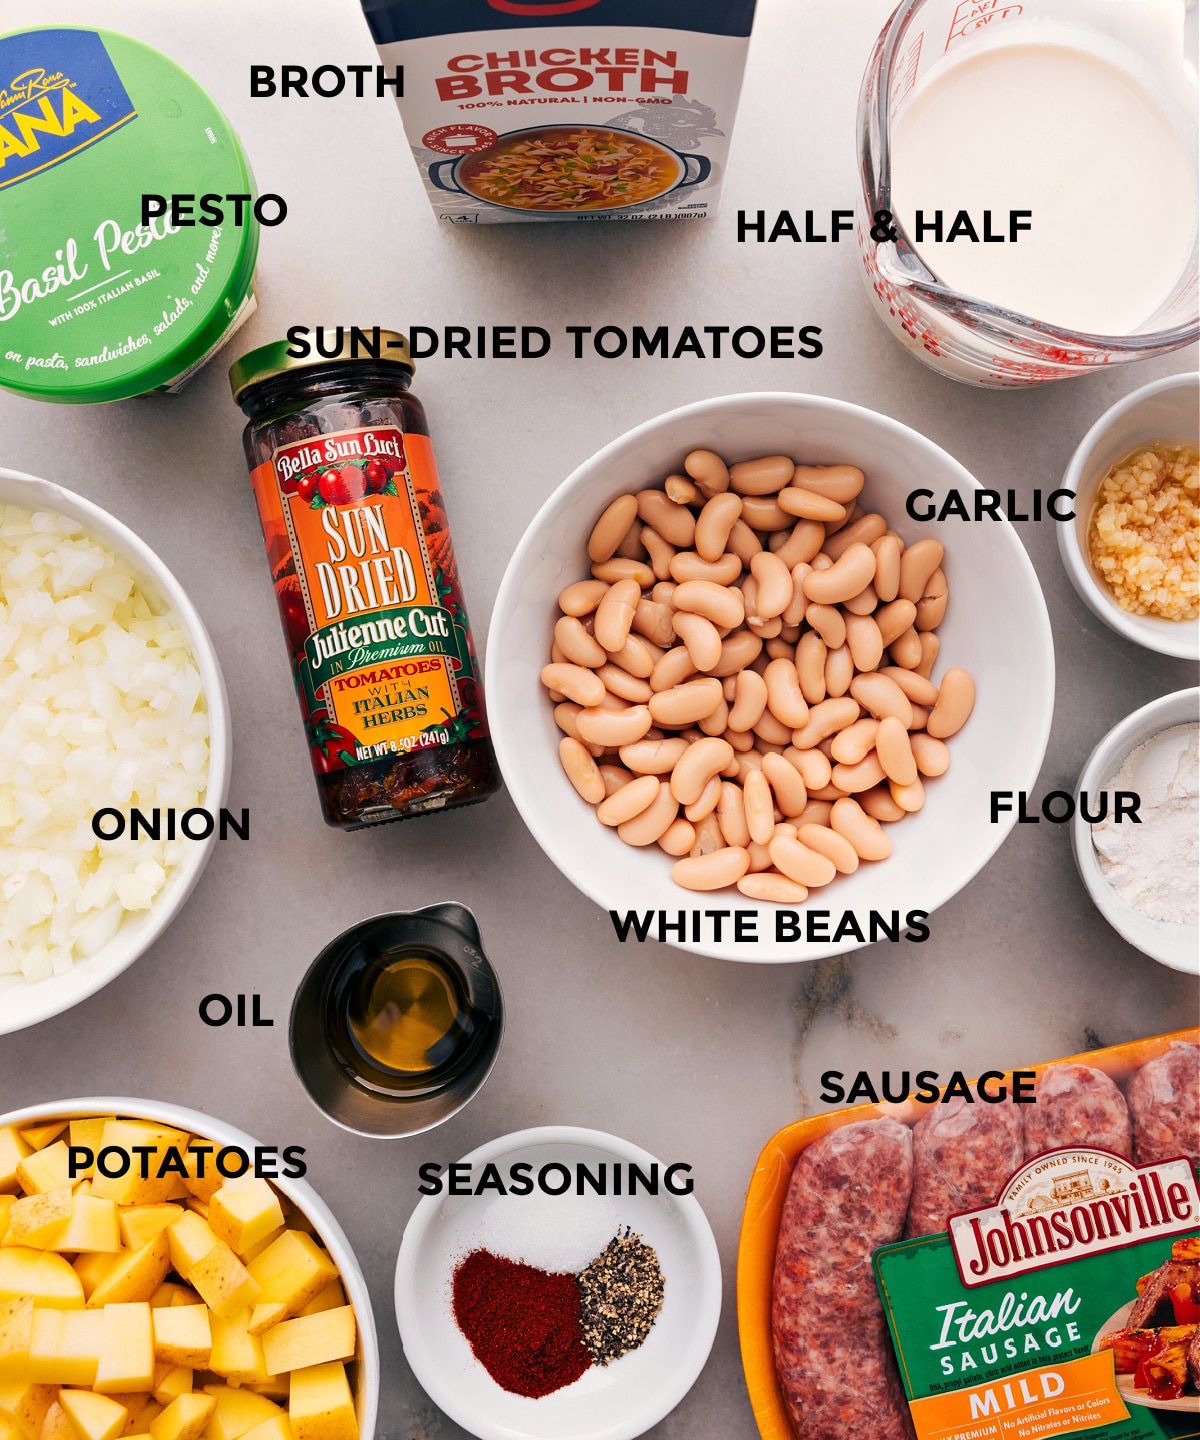 A collection of prepped ingredients for this recipe, including white beans, chopped onions, various seasonings, and more.